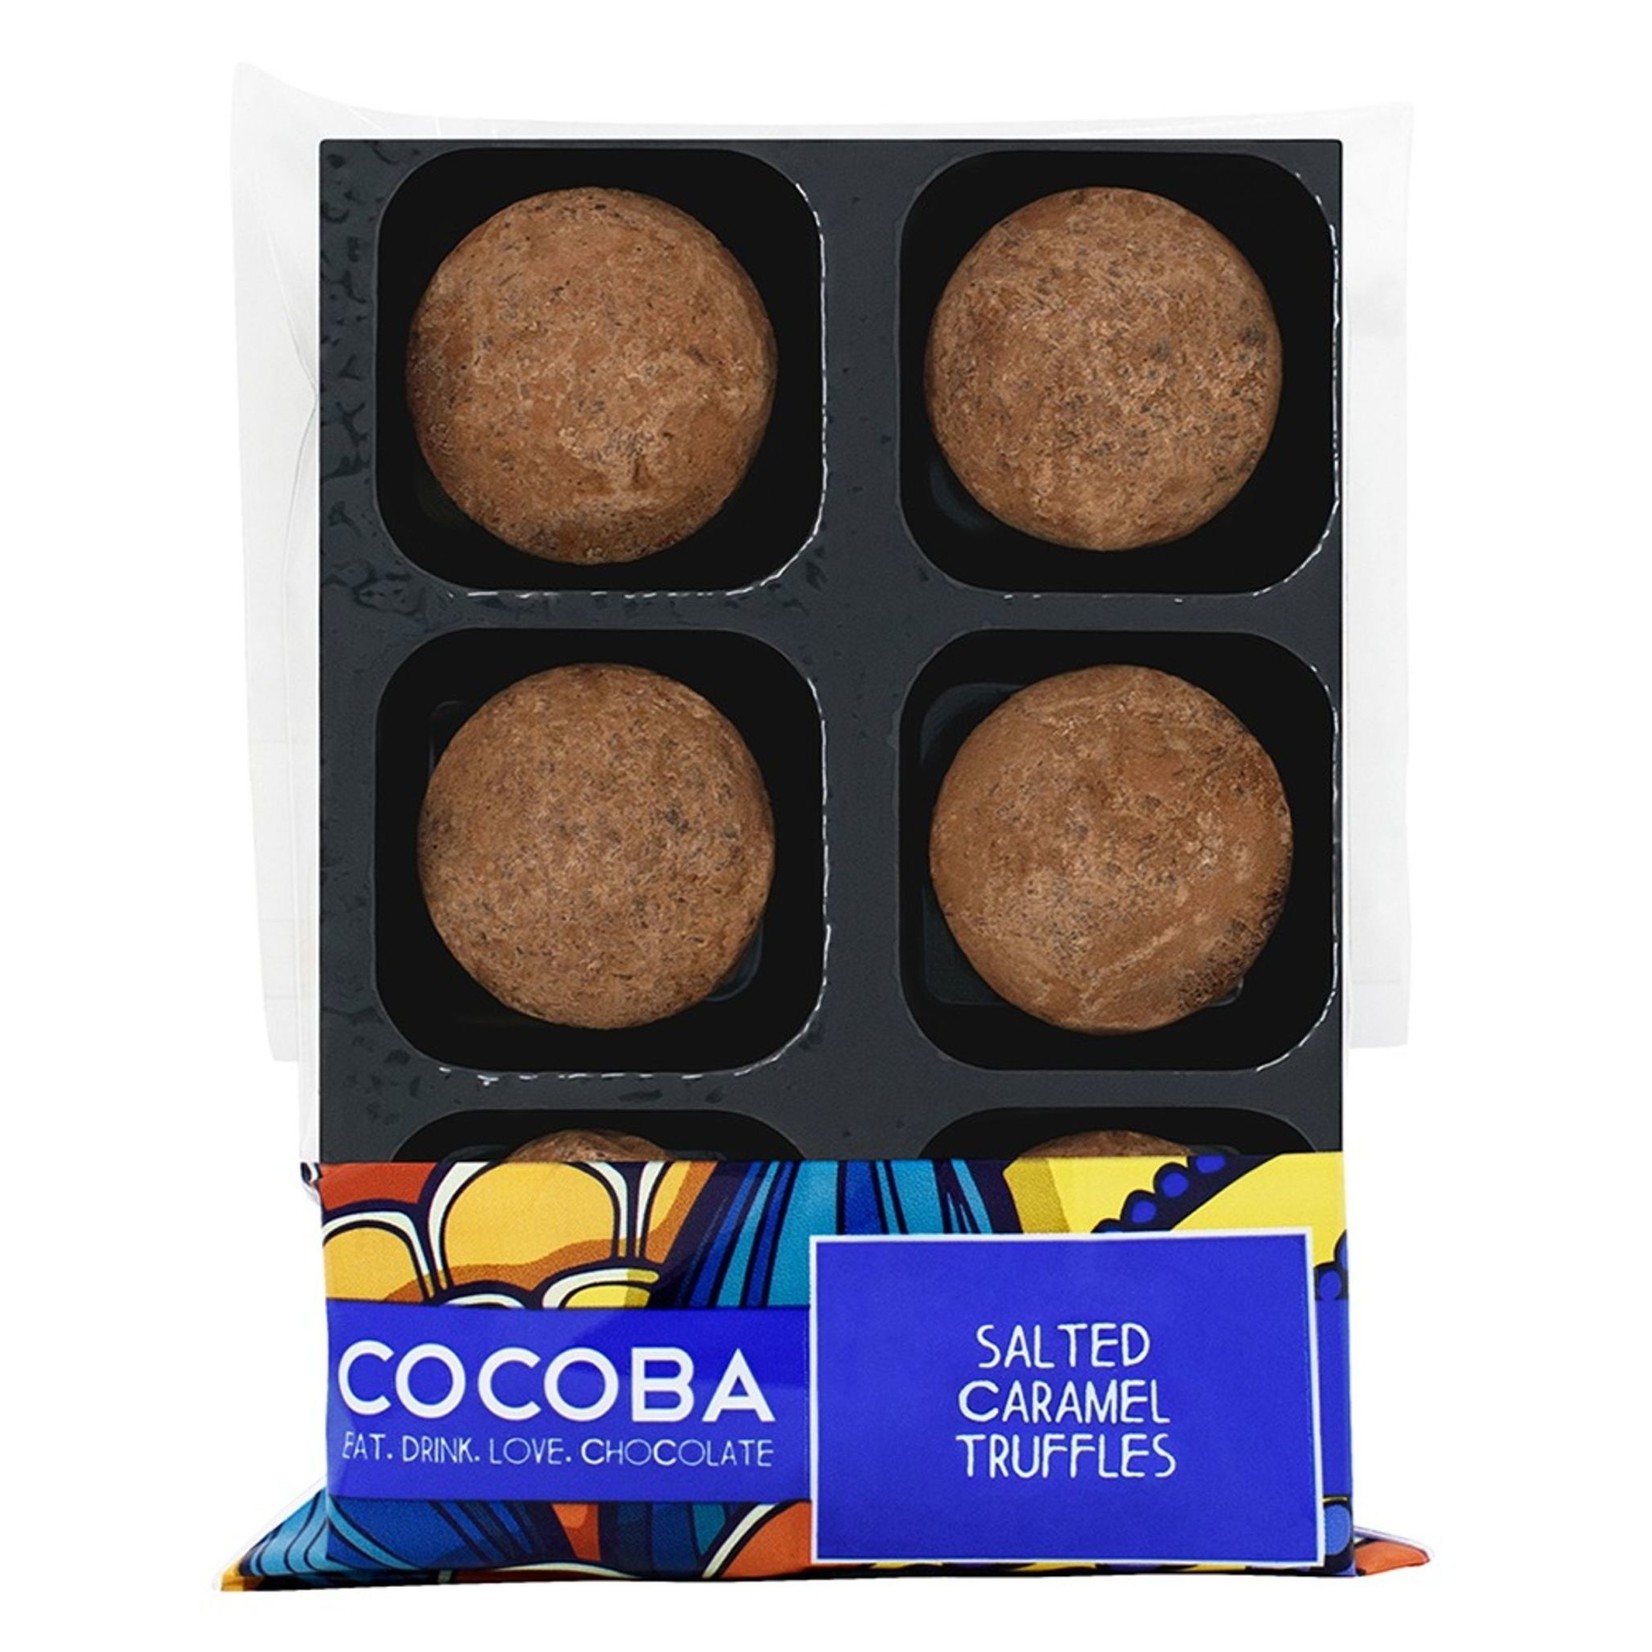 COCOBA COCOBA Salted Caramel Truffles